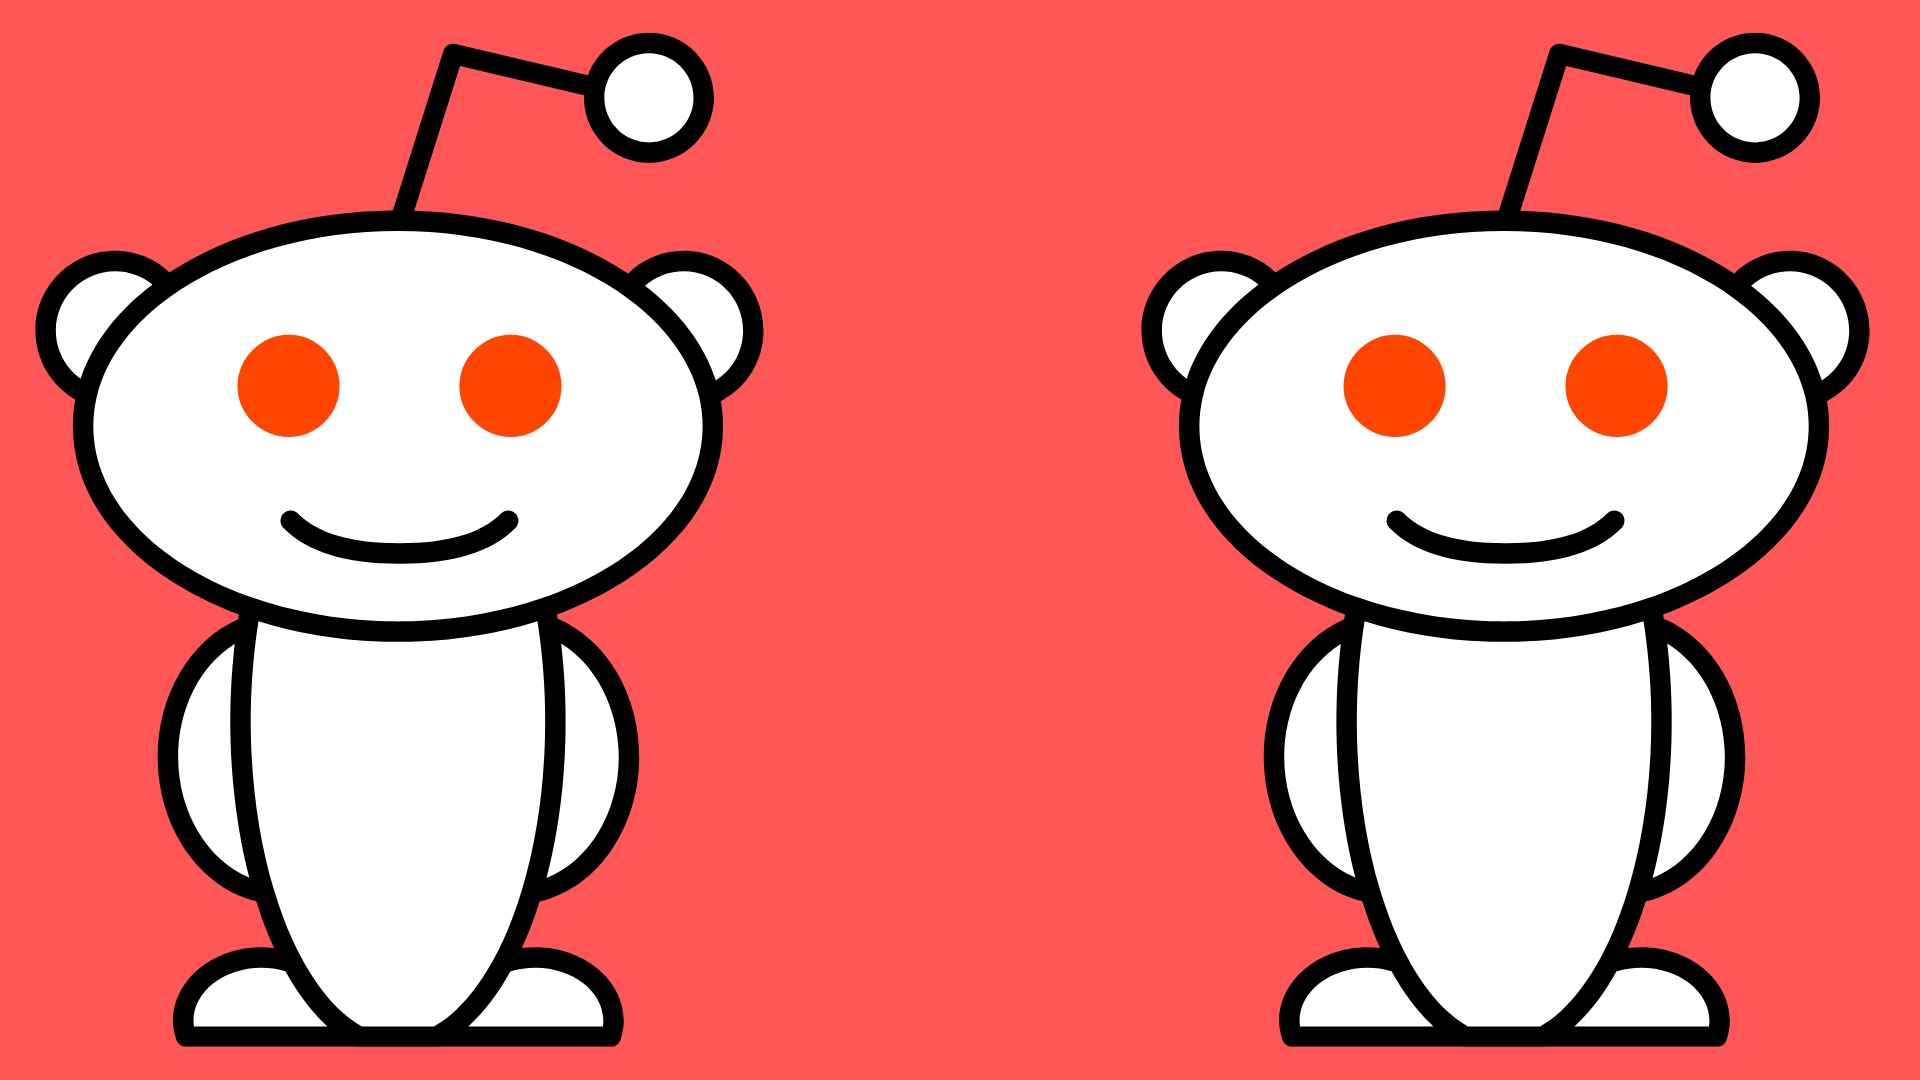 Are there any rewards or recognition for active and helpful Reddit users?